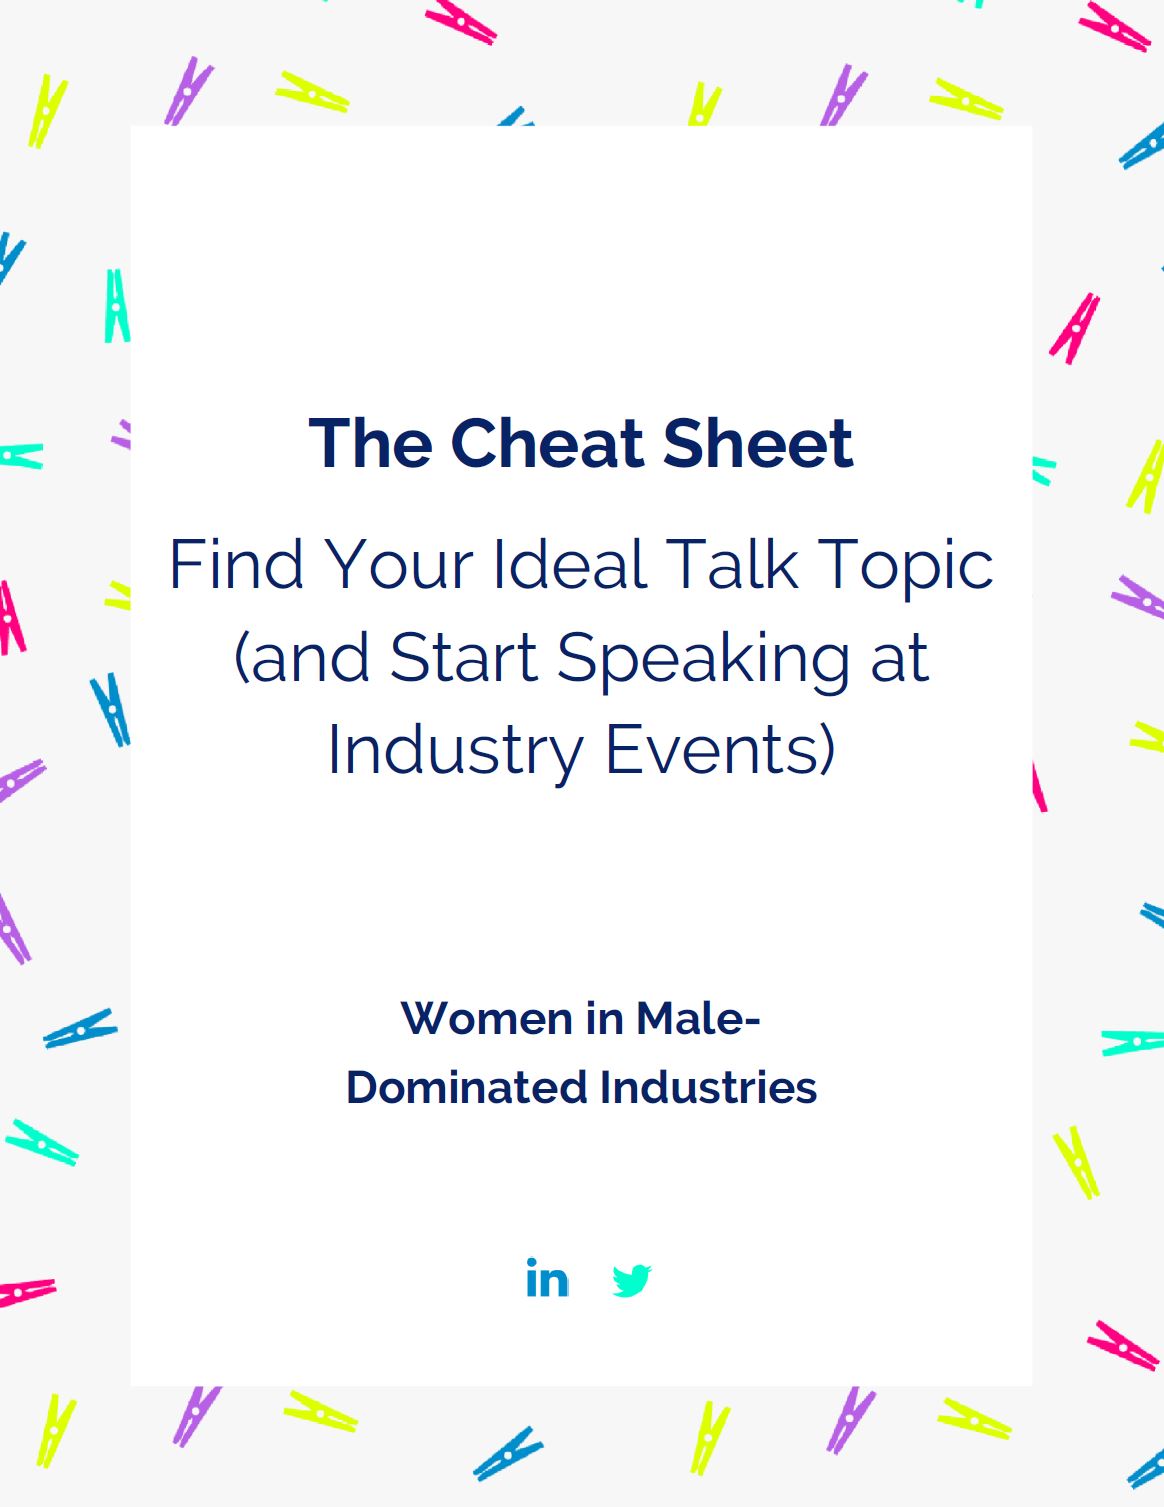 The Cheat Sheet: Find Your Ideal Talk Topic & Start Speaking at Industry Events